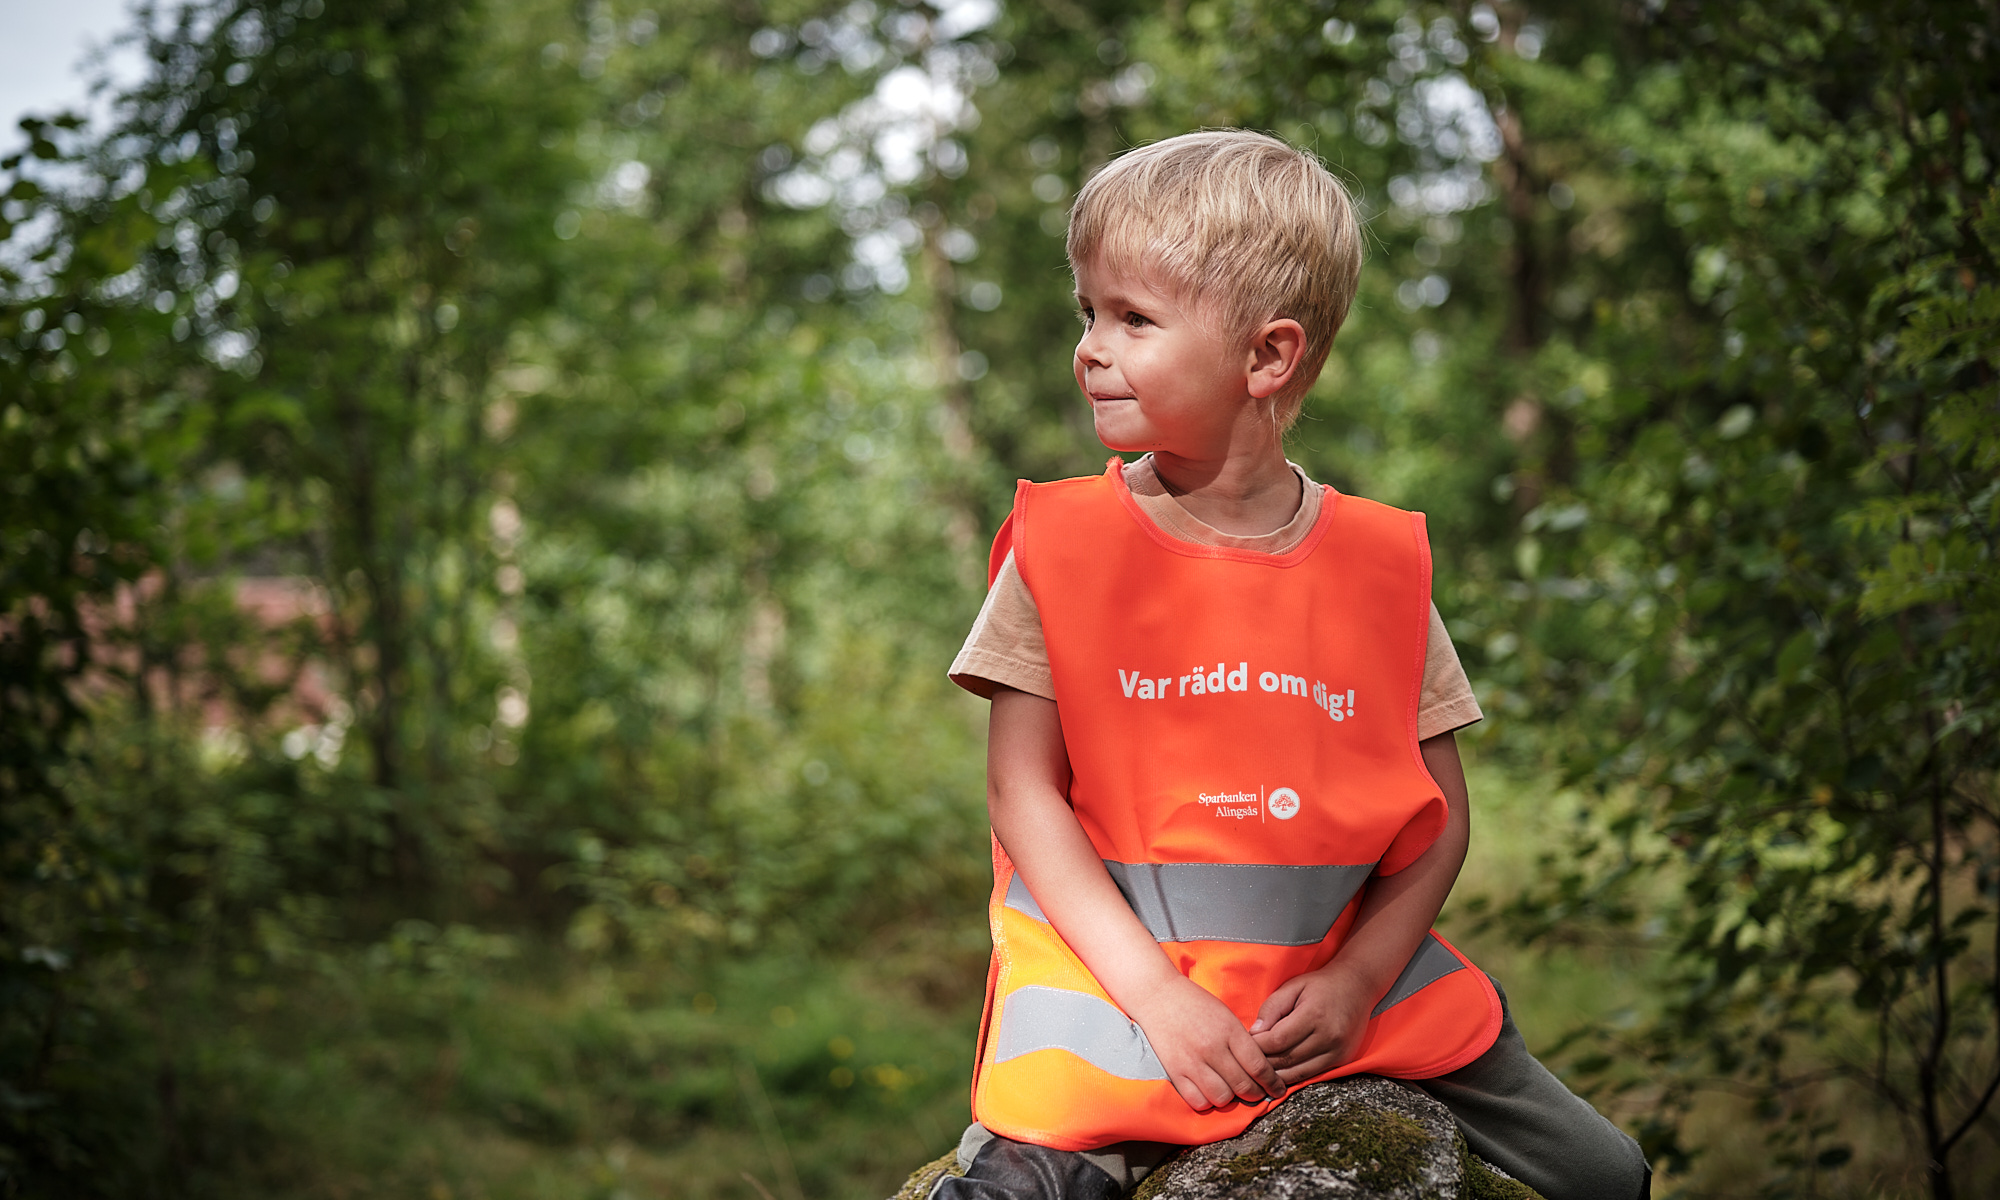 We give  reflective vest to all children who are 6 years and start school.